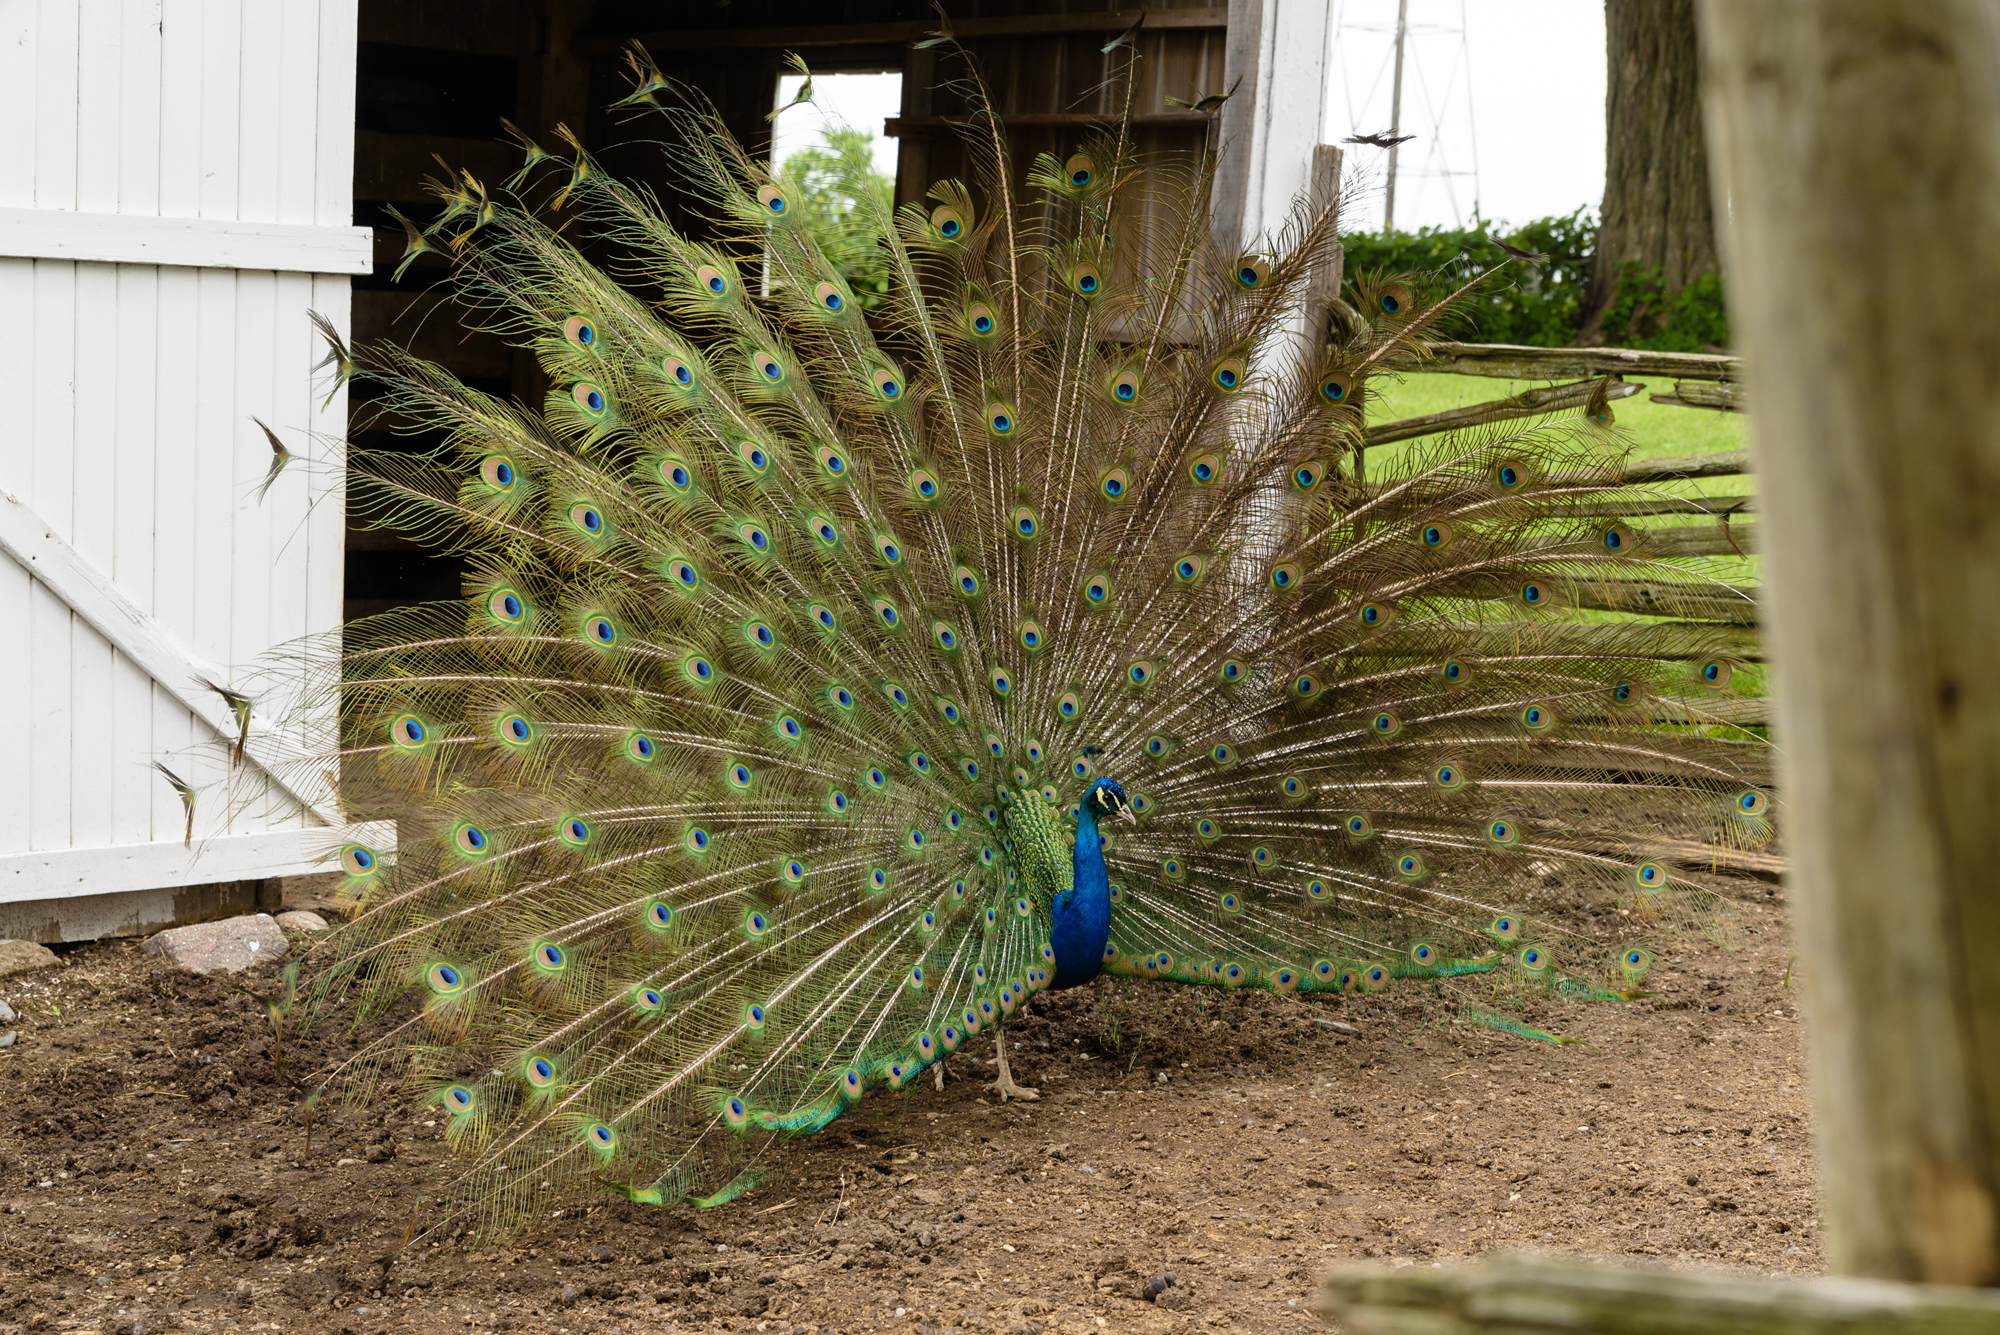 Peacock at Amish Acres